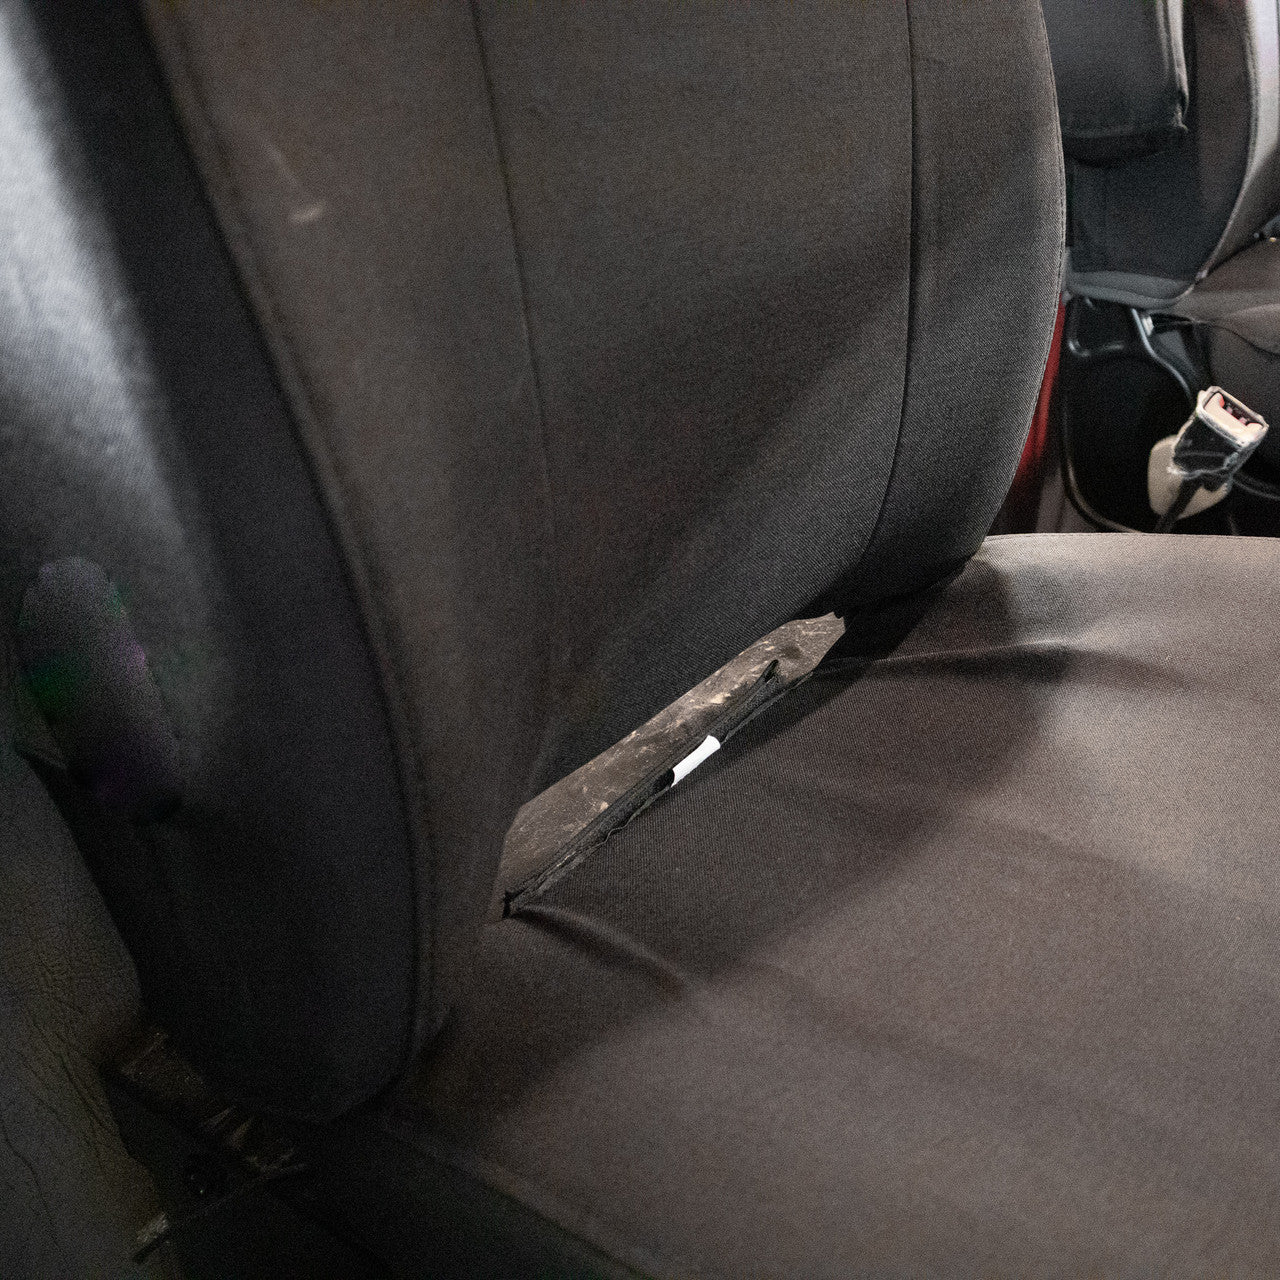 Kenworth passenger seat with TigerTough seat cover in black IronWeave